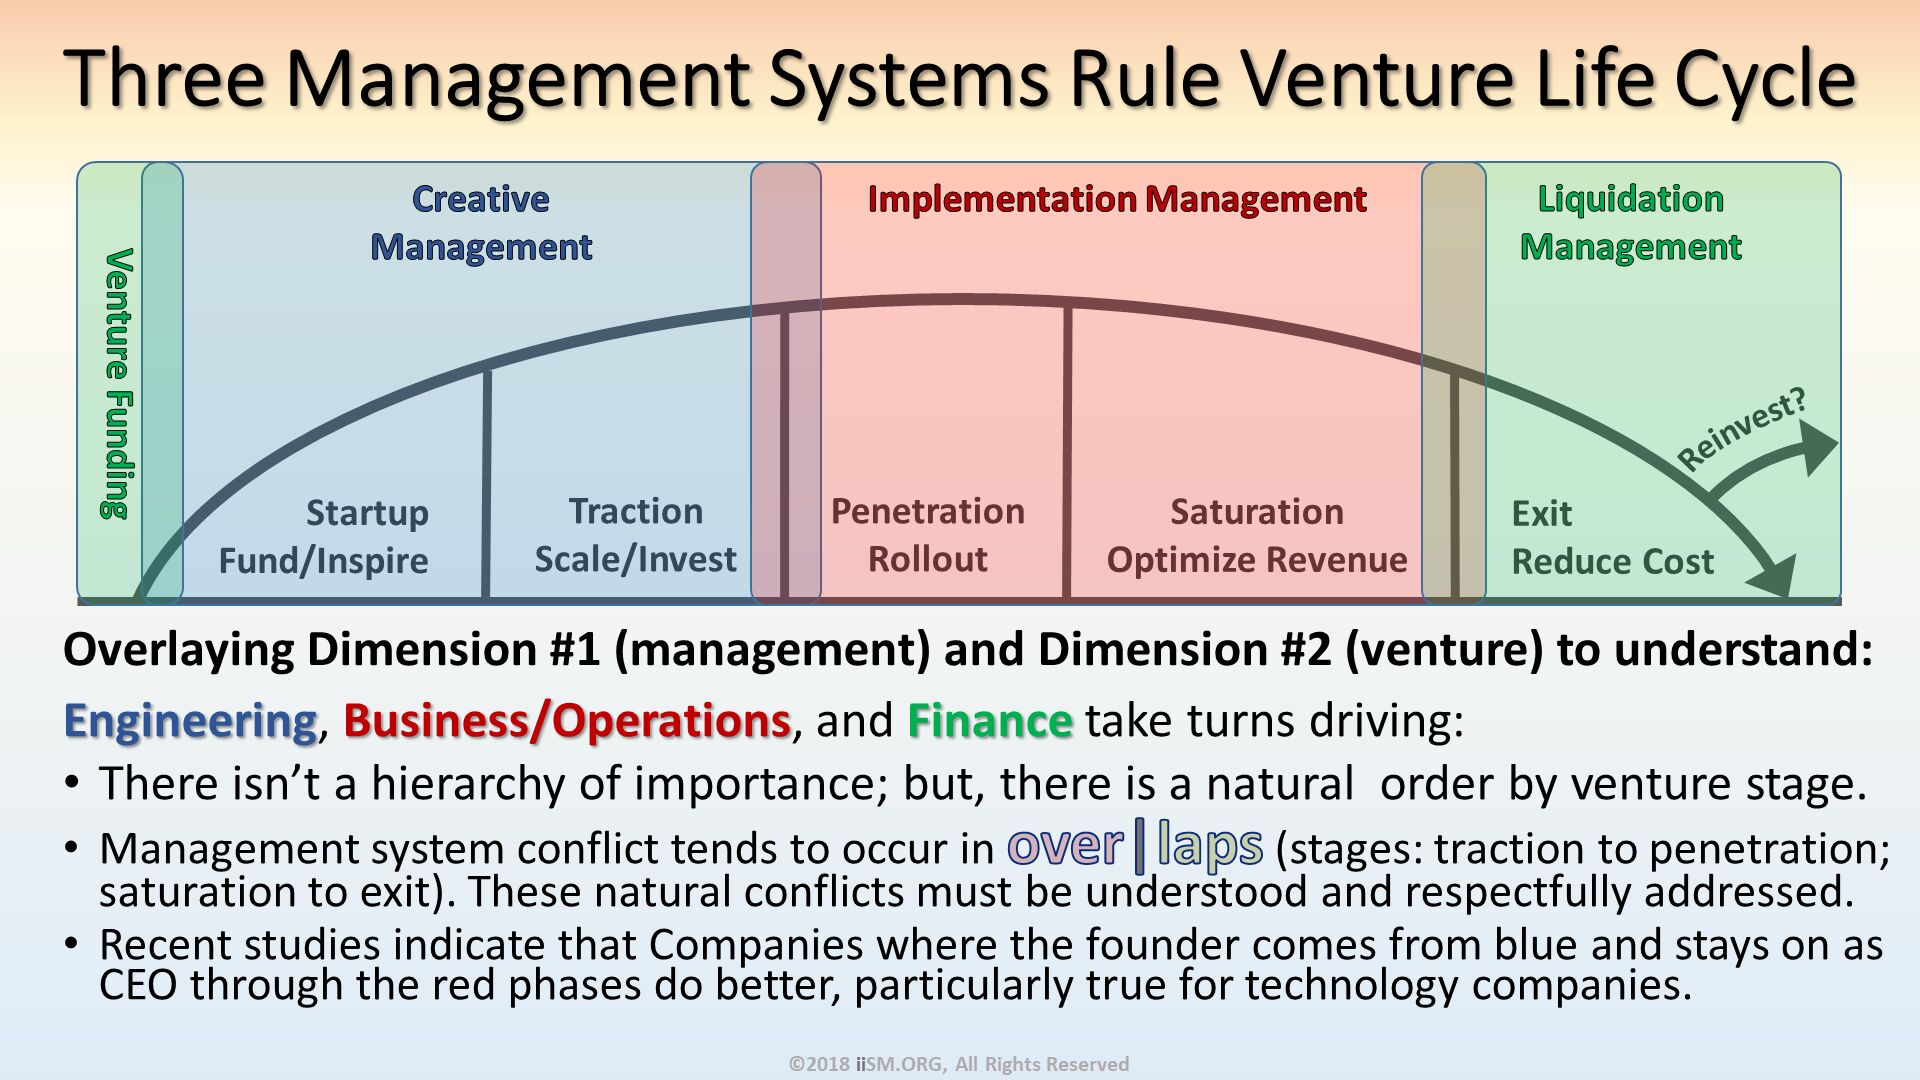 Three Management Systems Rule Venture Life Cycle. Engineering, Business/Operations, and Finance take turns driving:
There isn’t a hierarchy of importance; but, there is a natural  order by venture stage.
Management system conflict tends to occur in over| laps (stages: traction to penetration; saturation to exit). These natural conflicts must be understood and respectfully addressed.
Recent studies indicate that Companies where the founder comes from blue and stays on as CEO through the red phases do better, particularly true for technology companies. ©2018 iiSM.ORG, All Rights Reserved. Overlaying Dimension #1 (management) and Dimension #2 (venture) to understand:. 